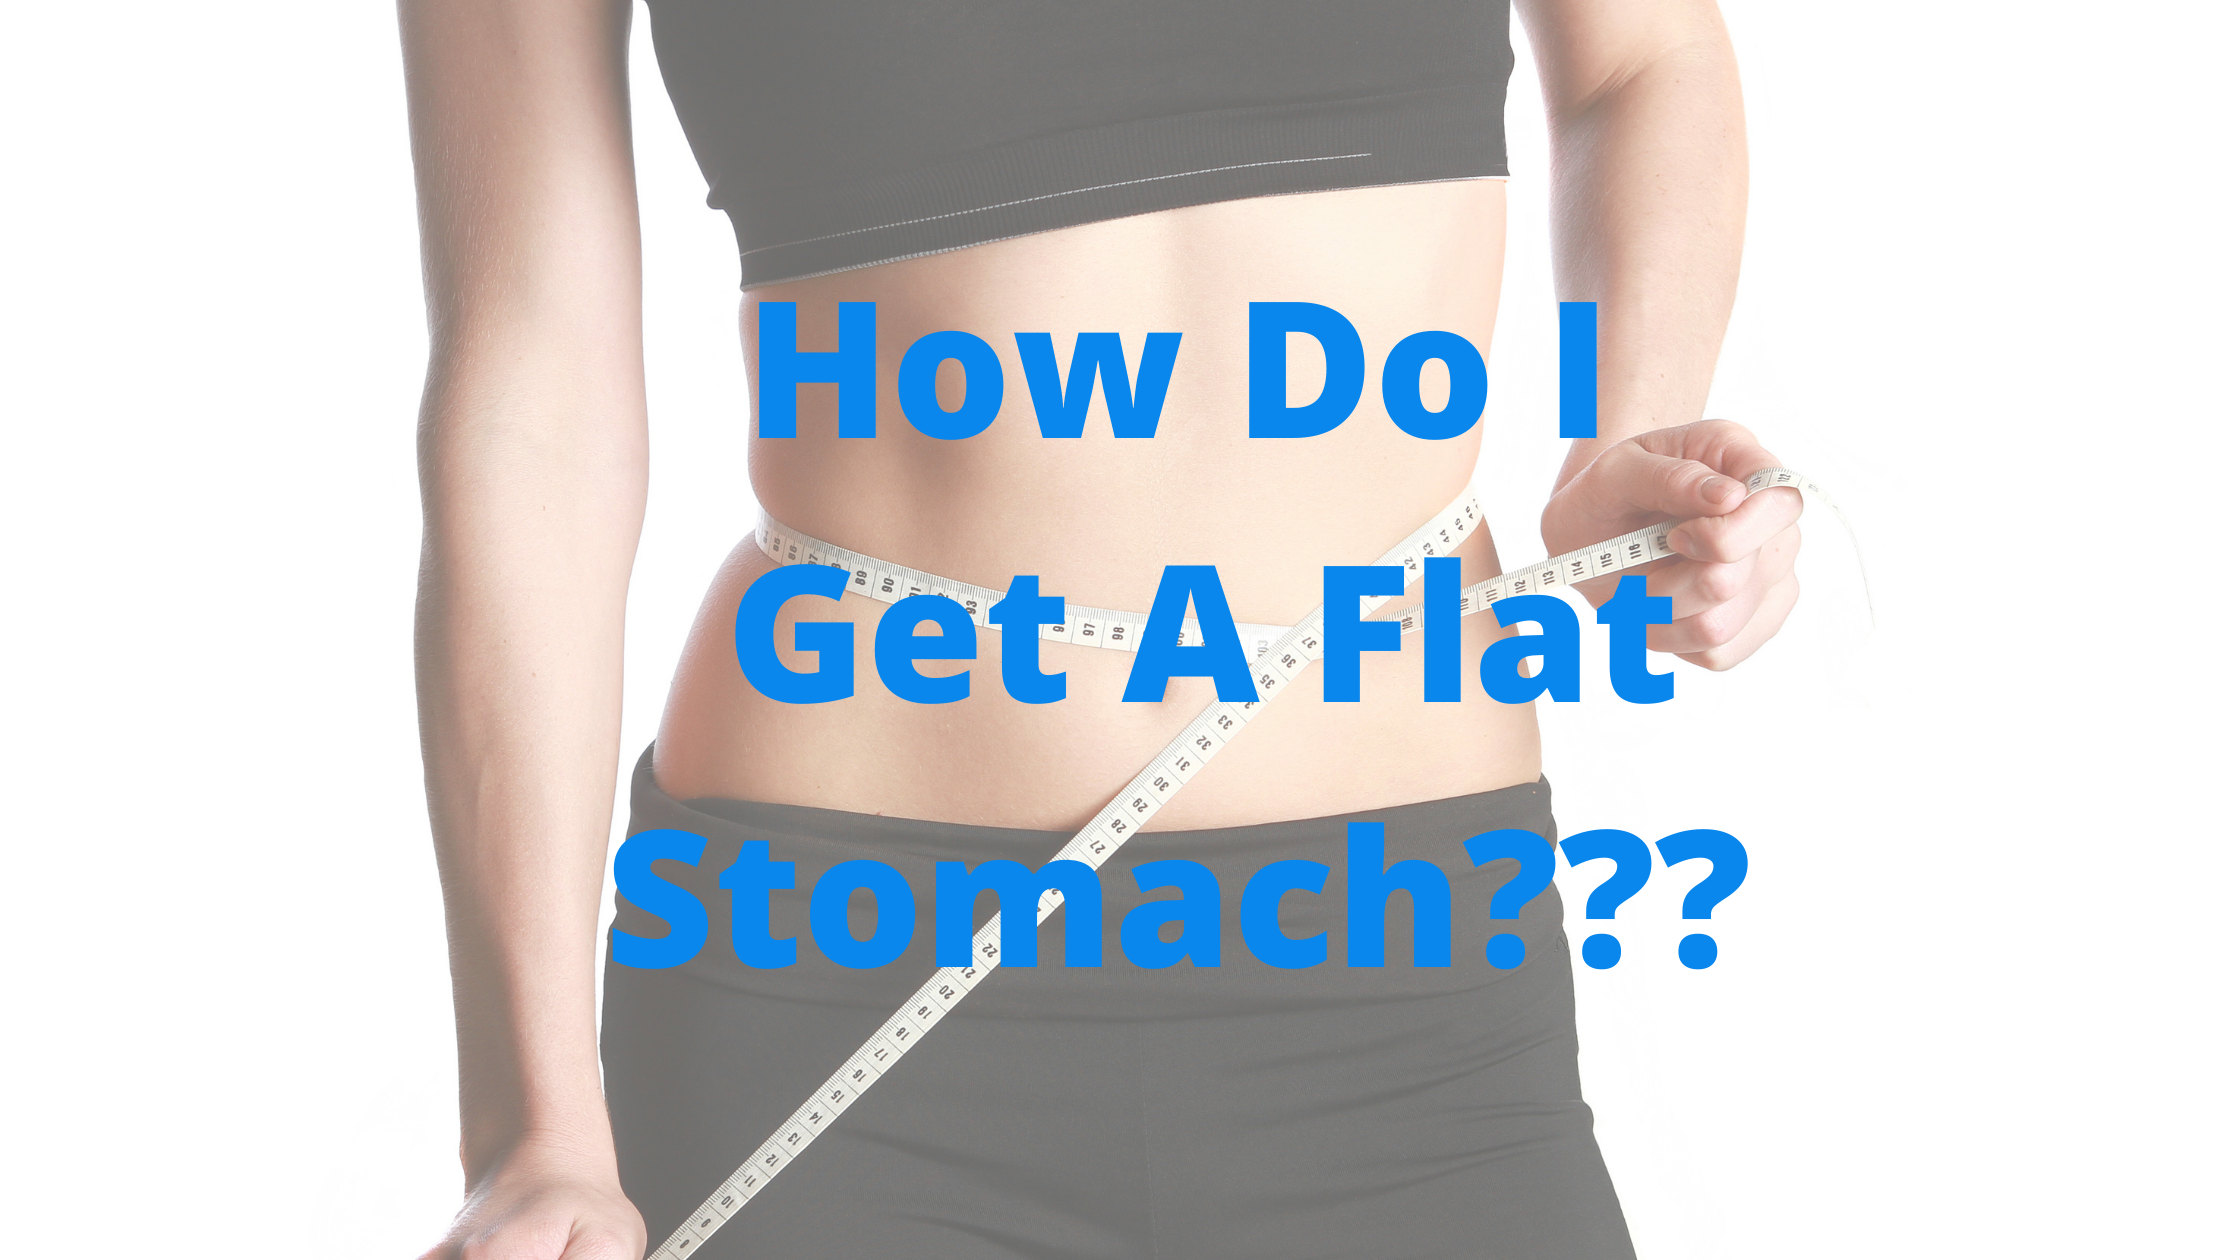 How Do I Get a Flat Stomach?